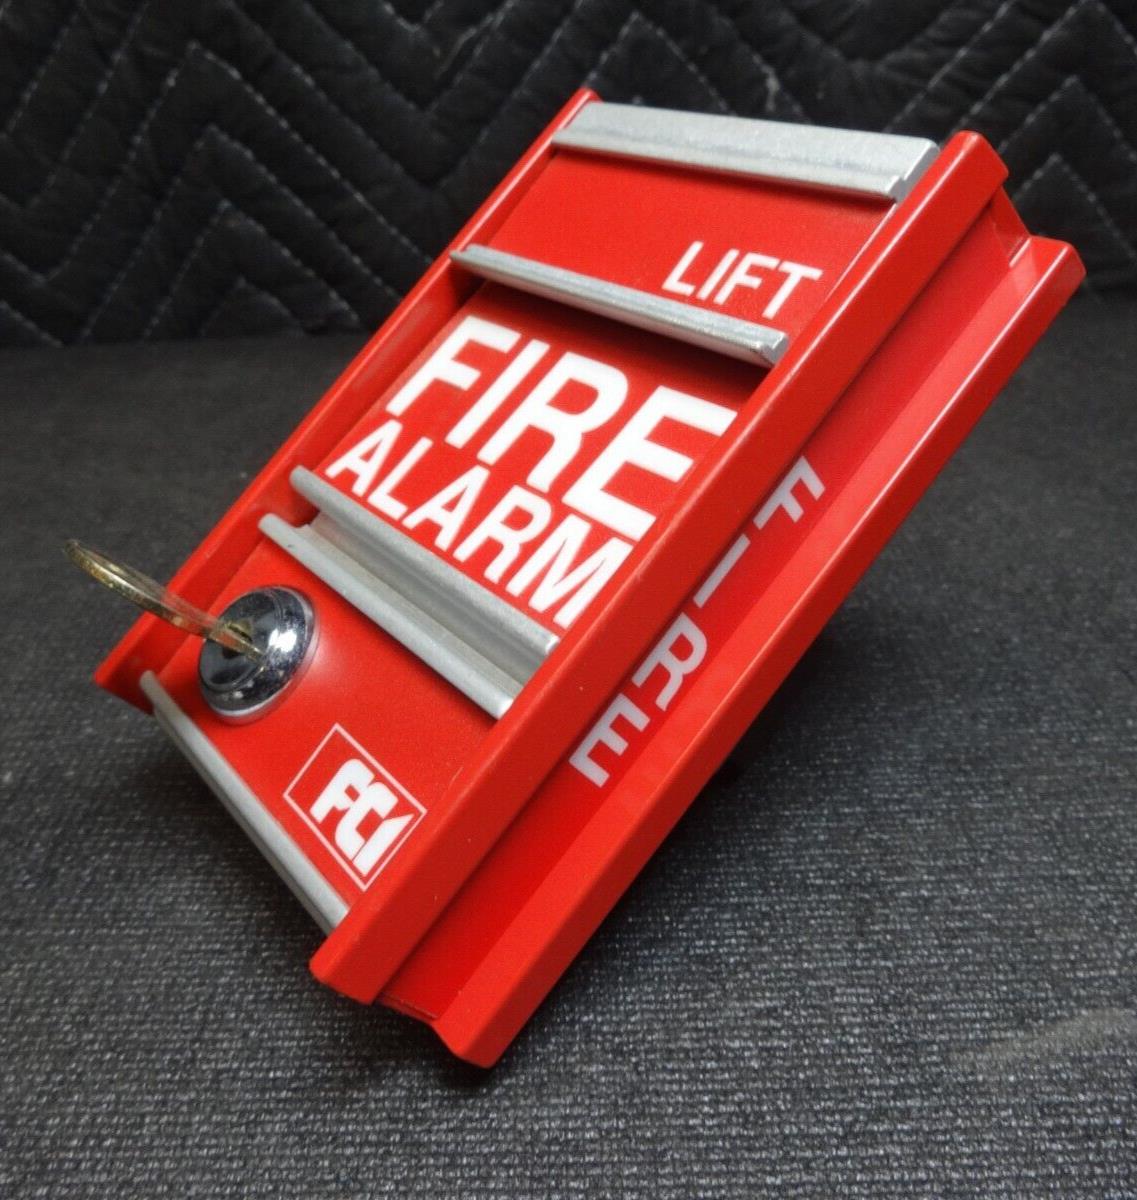 NEW OPEN BOX FCI MS-2 Fire Alarm Pull Station RED IN COLOR WITH KEY